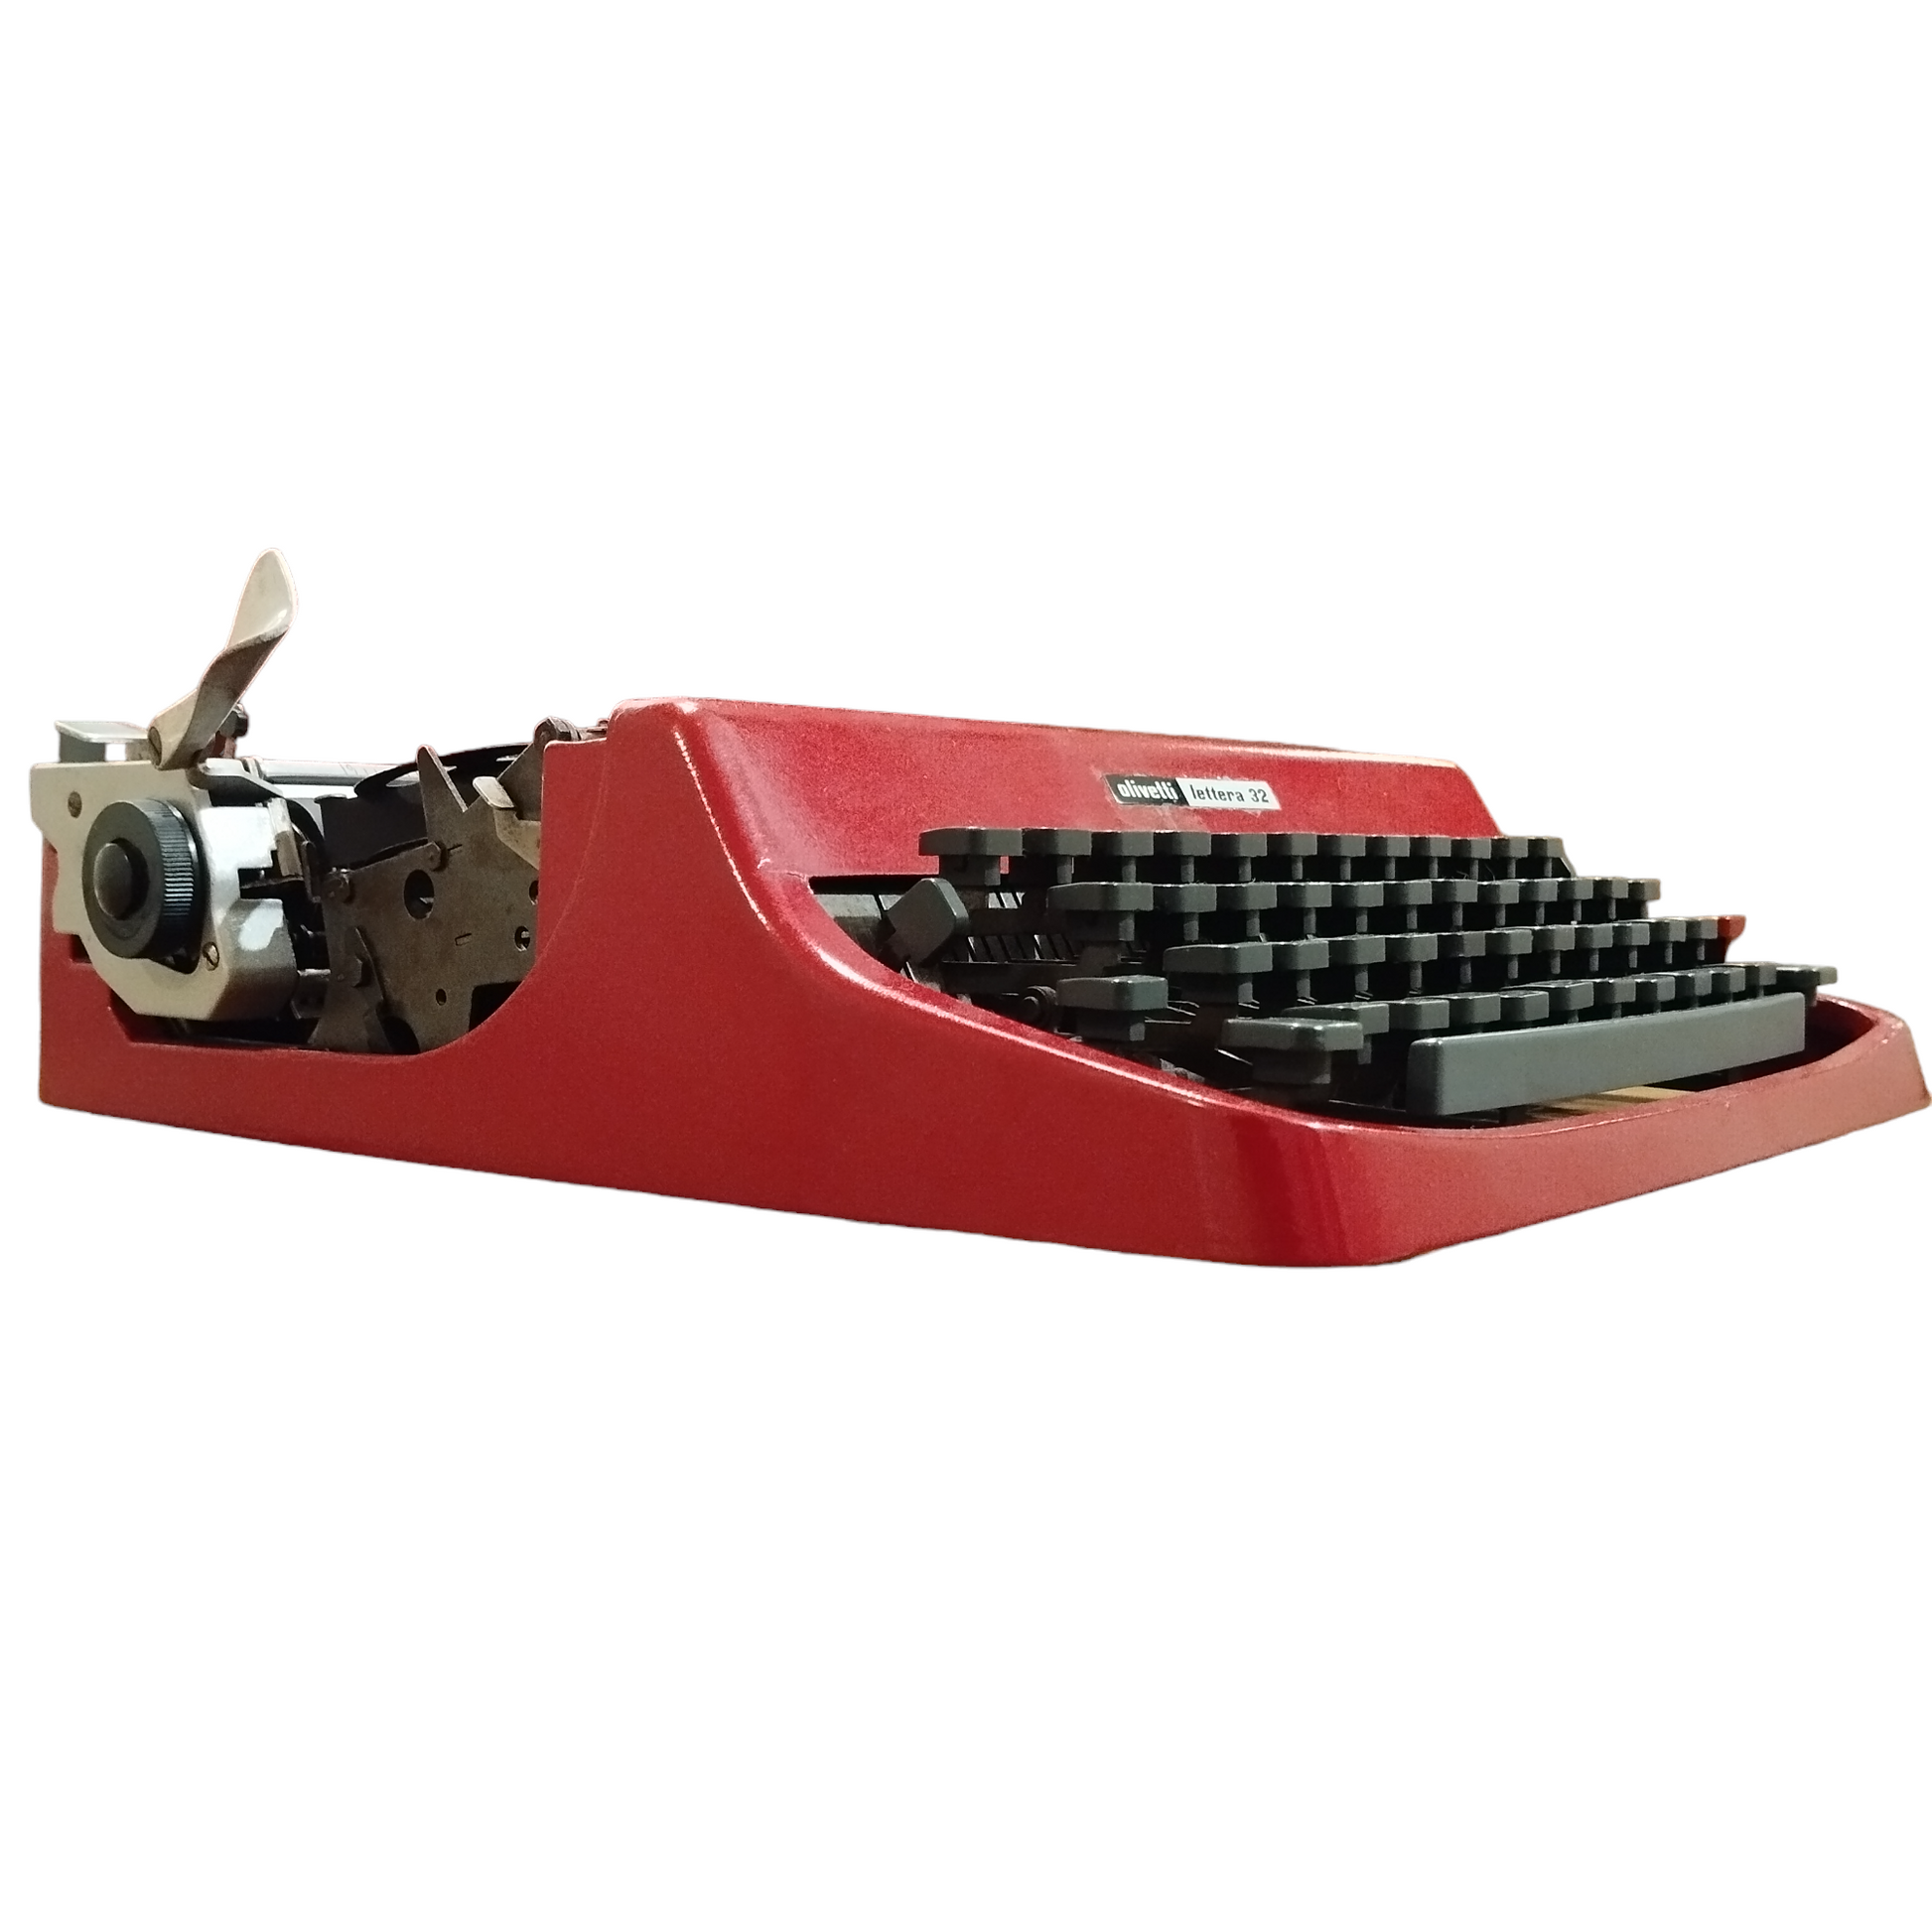 Image of Olivetti Lettera 32 Typewriter. Available from universaltypewritercompany.in